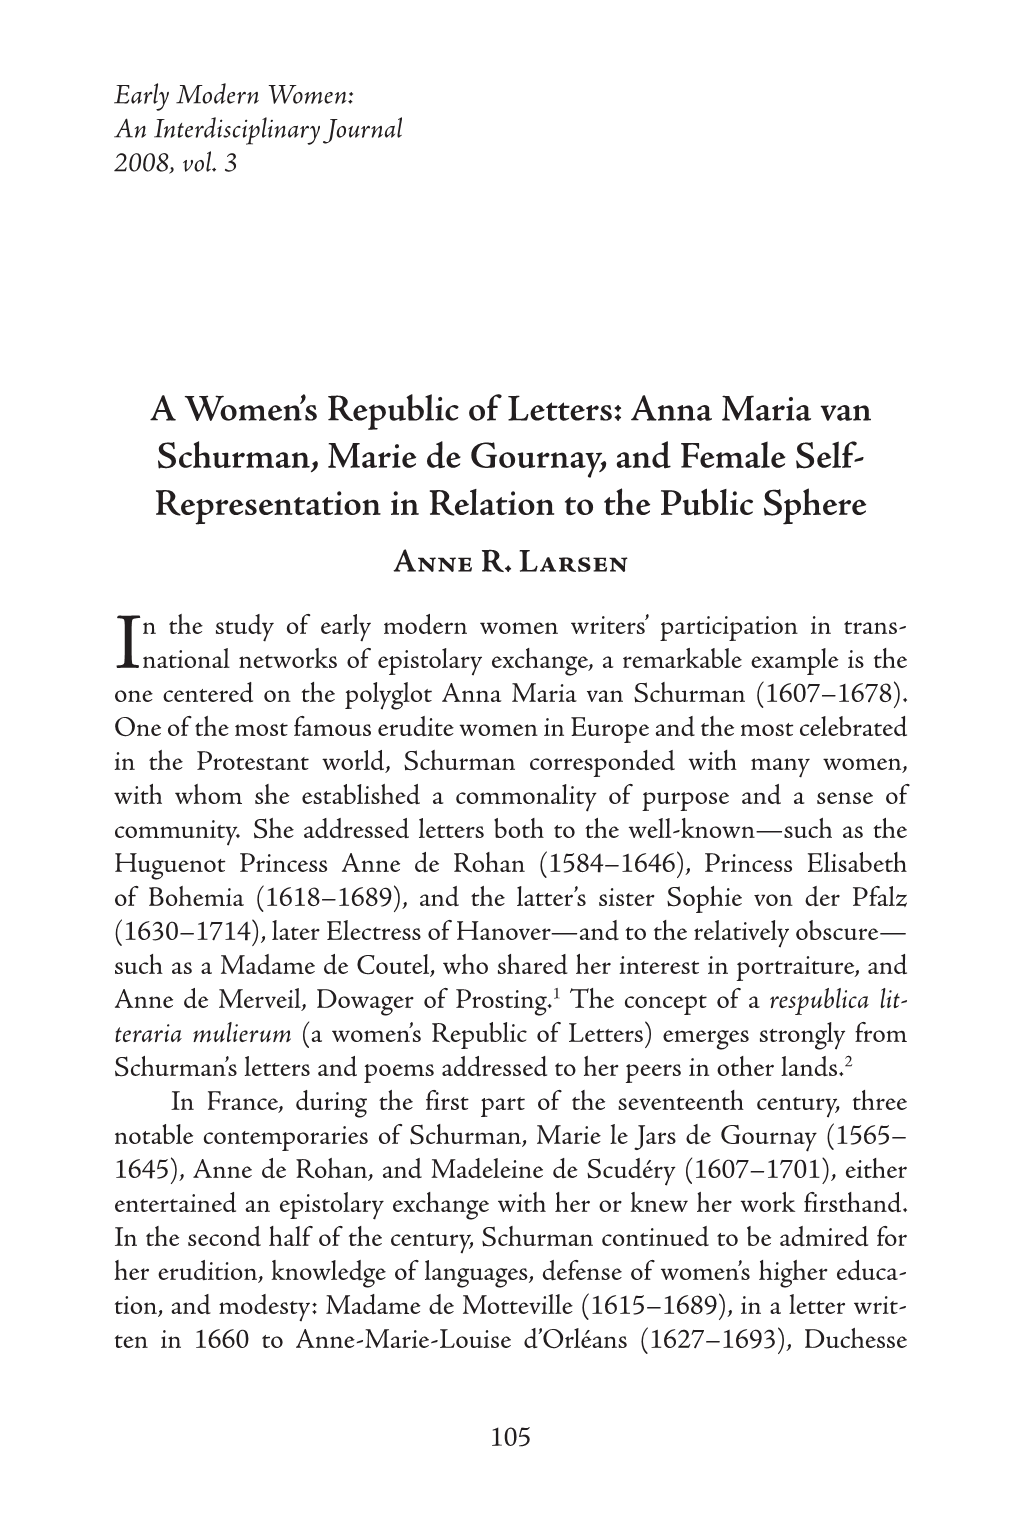 Anna Maria Van Schurman, Marie De Gournay, and Female Self- Representation in Relation to the Public Sphere Anne R